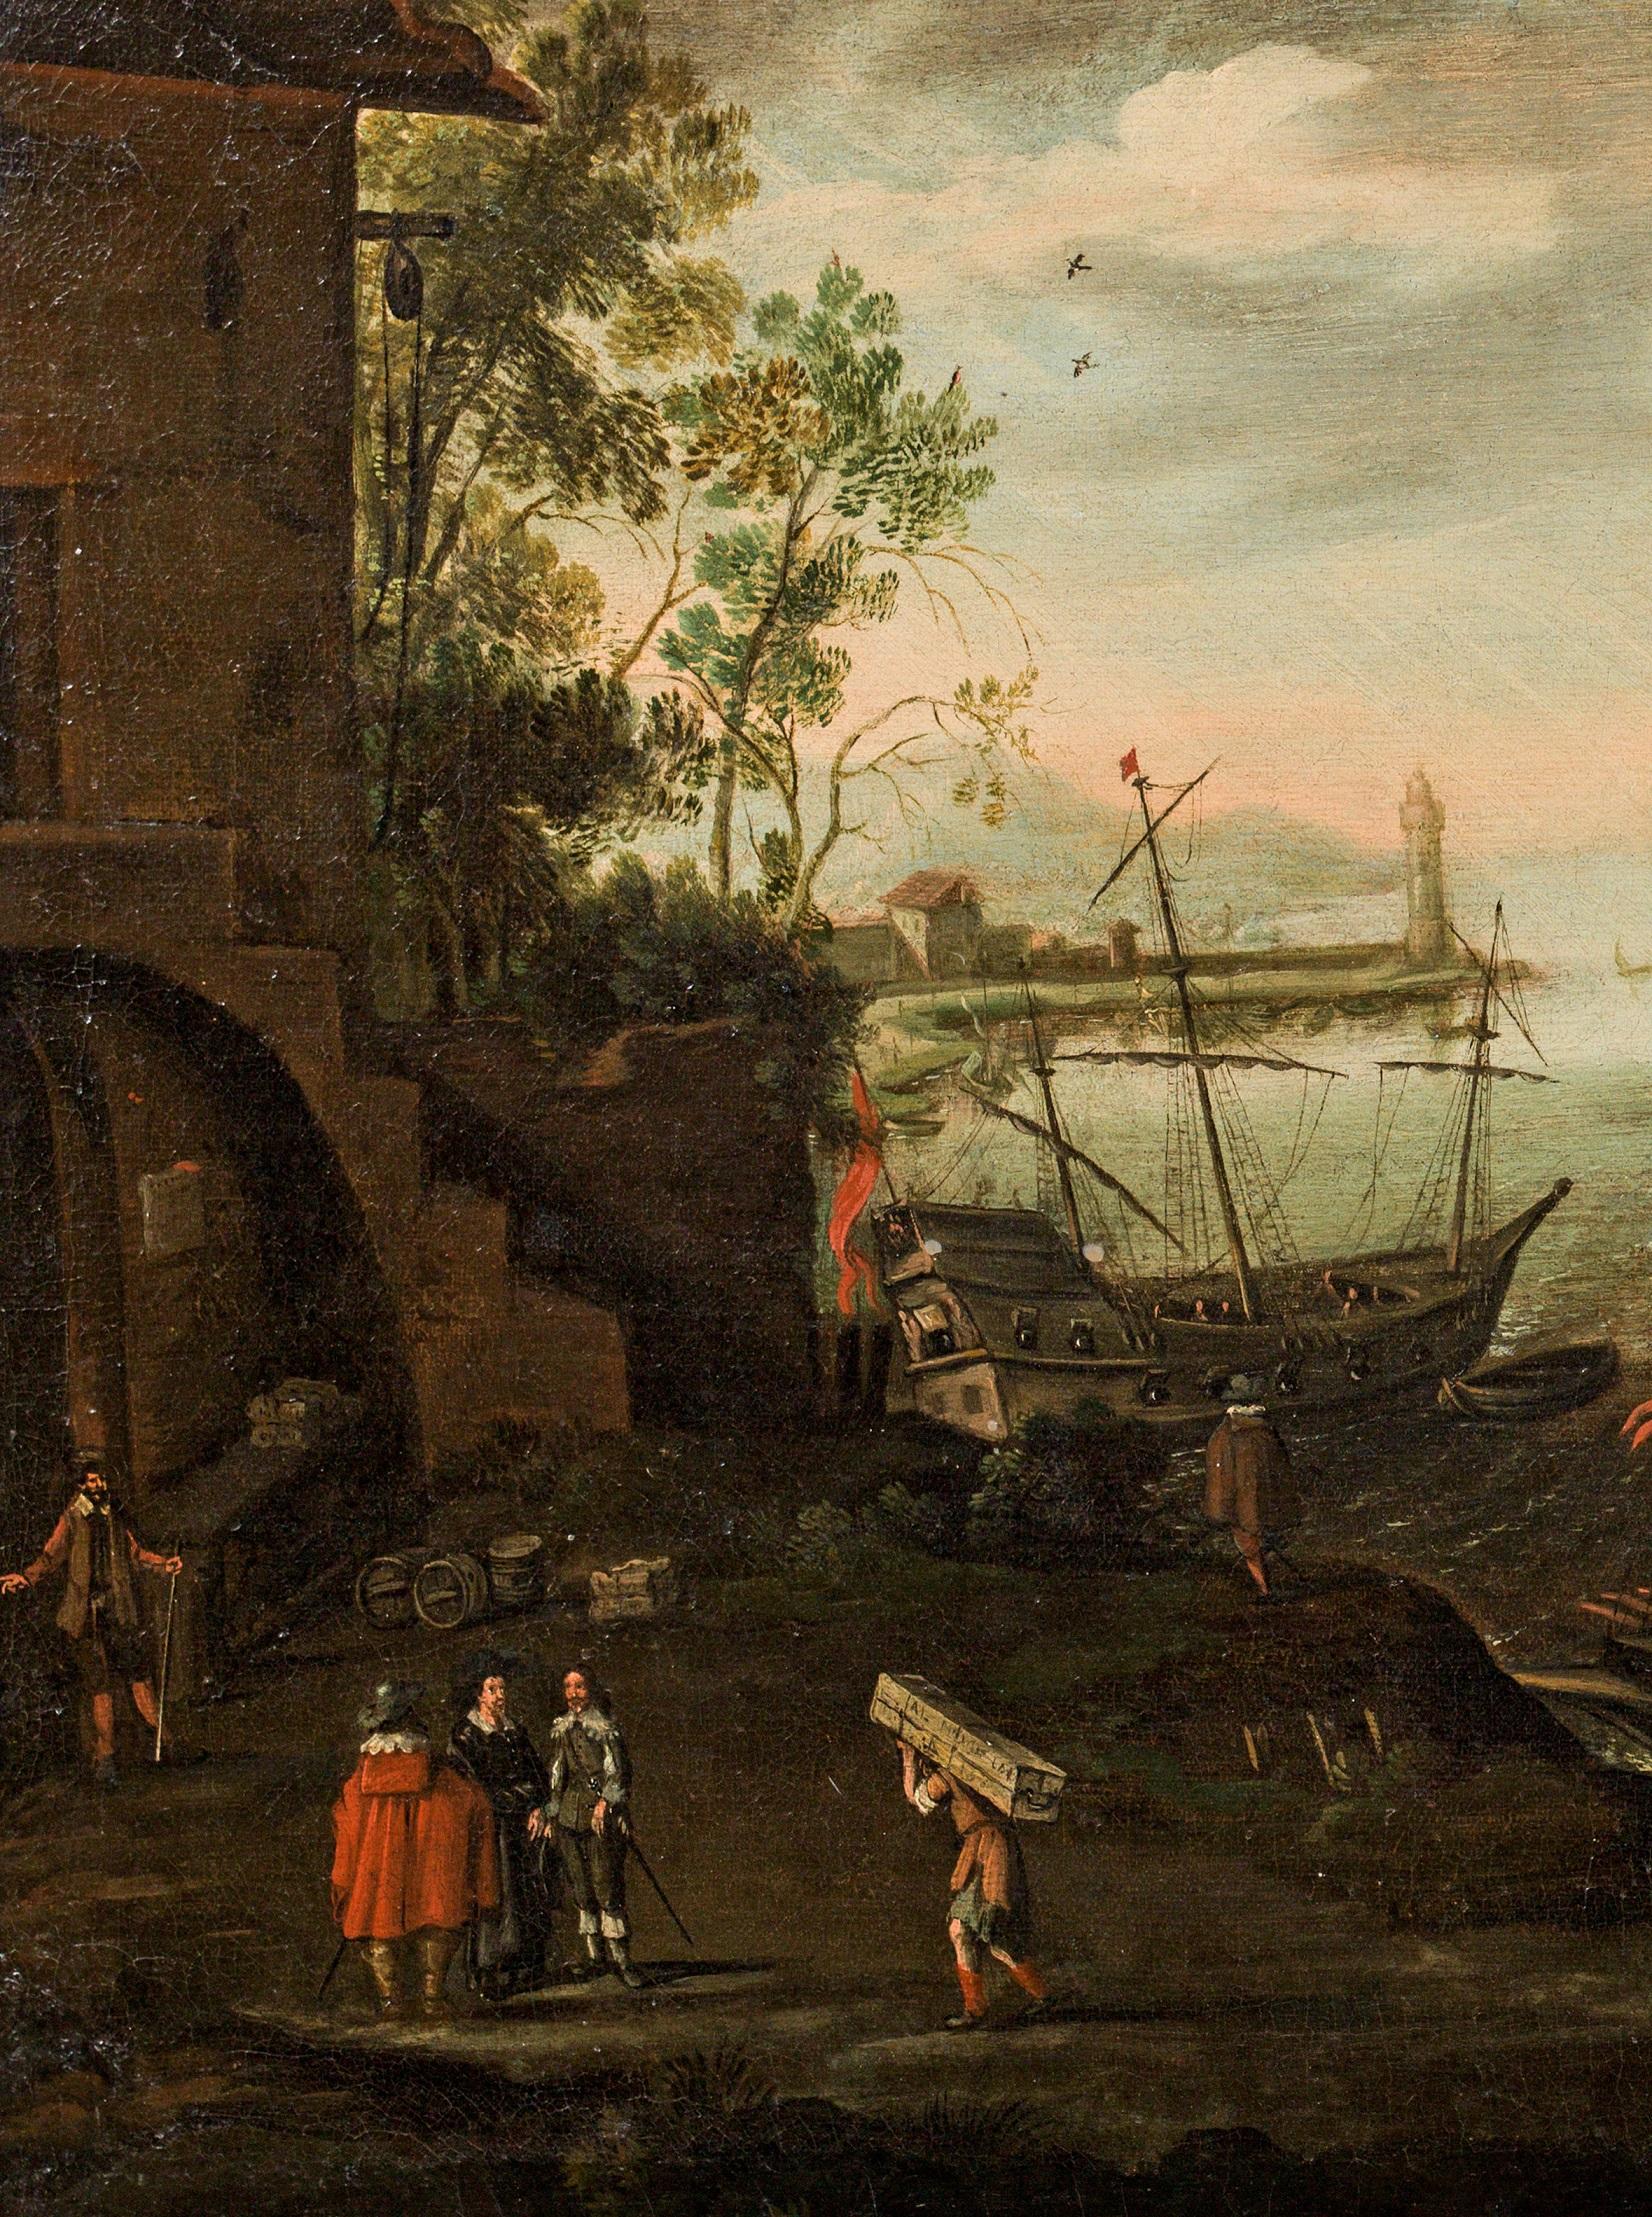 Sea Landscape Valckenborch Paint Oil on canvas Old master 17th Century Flemish For Sale 1